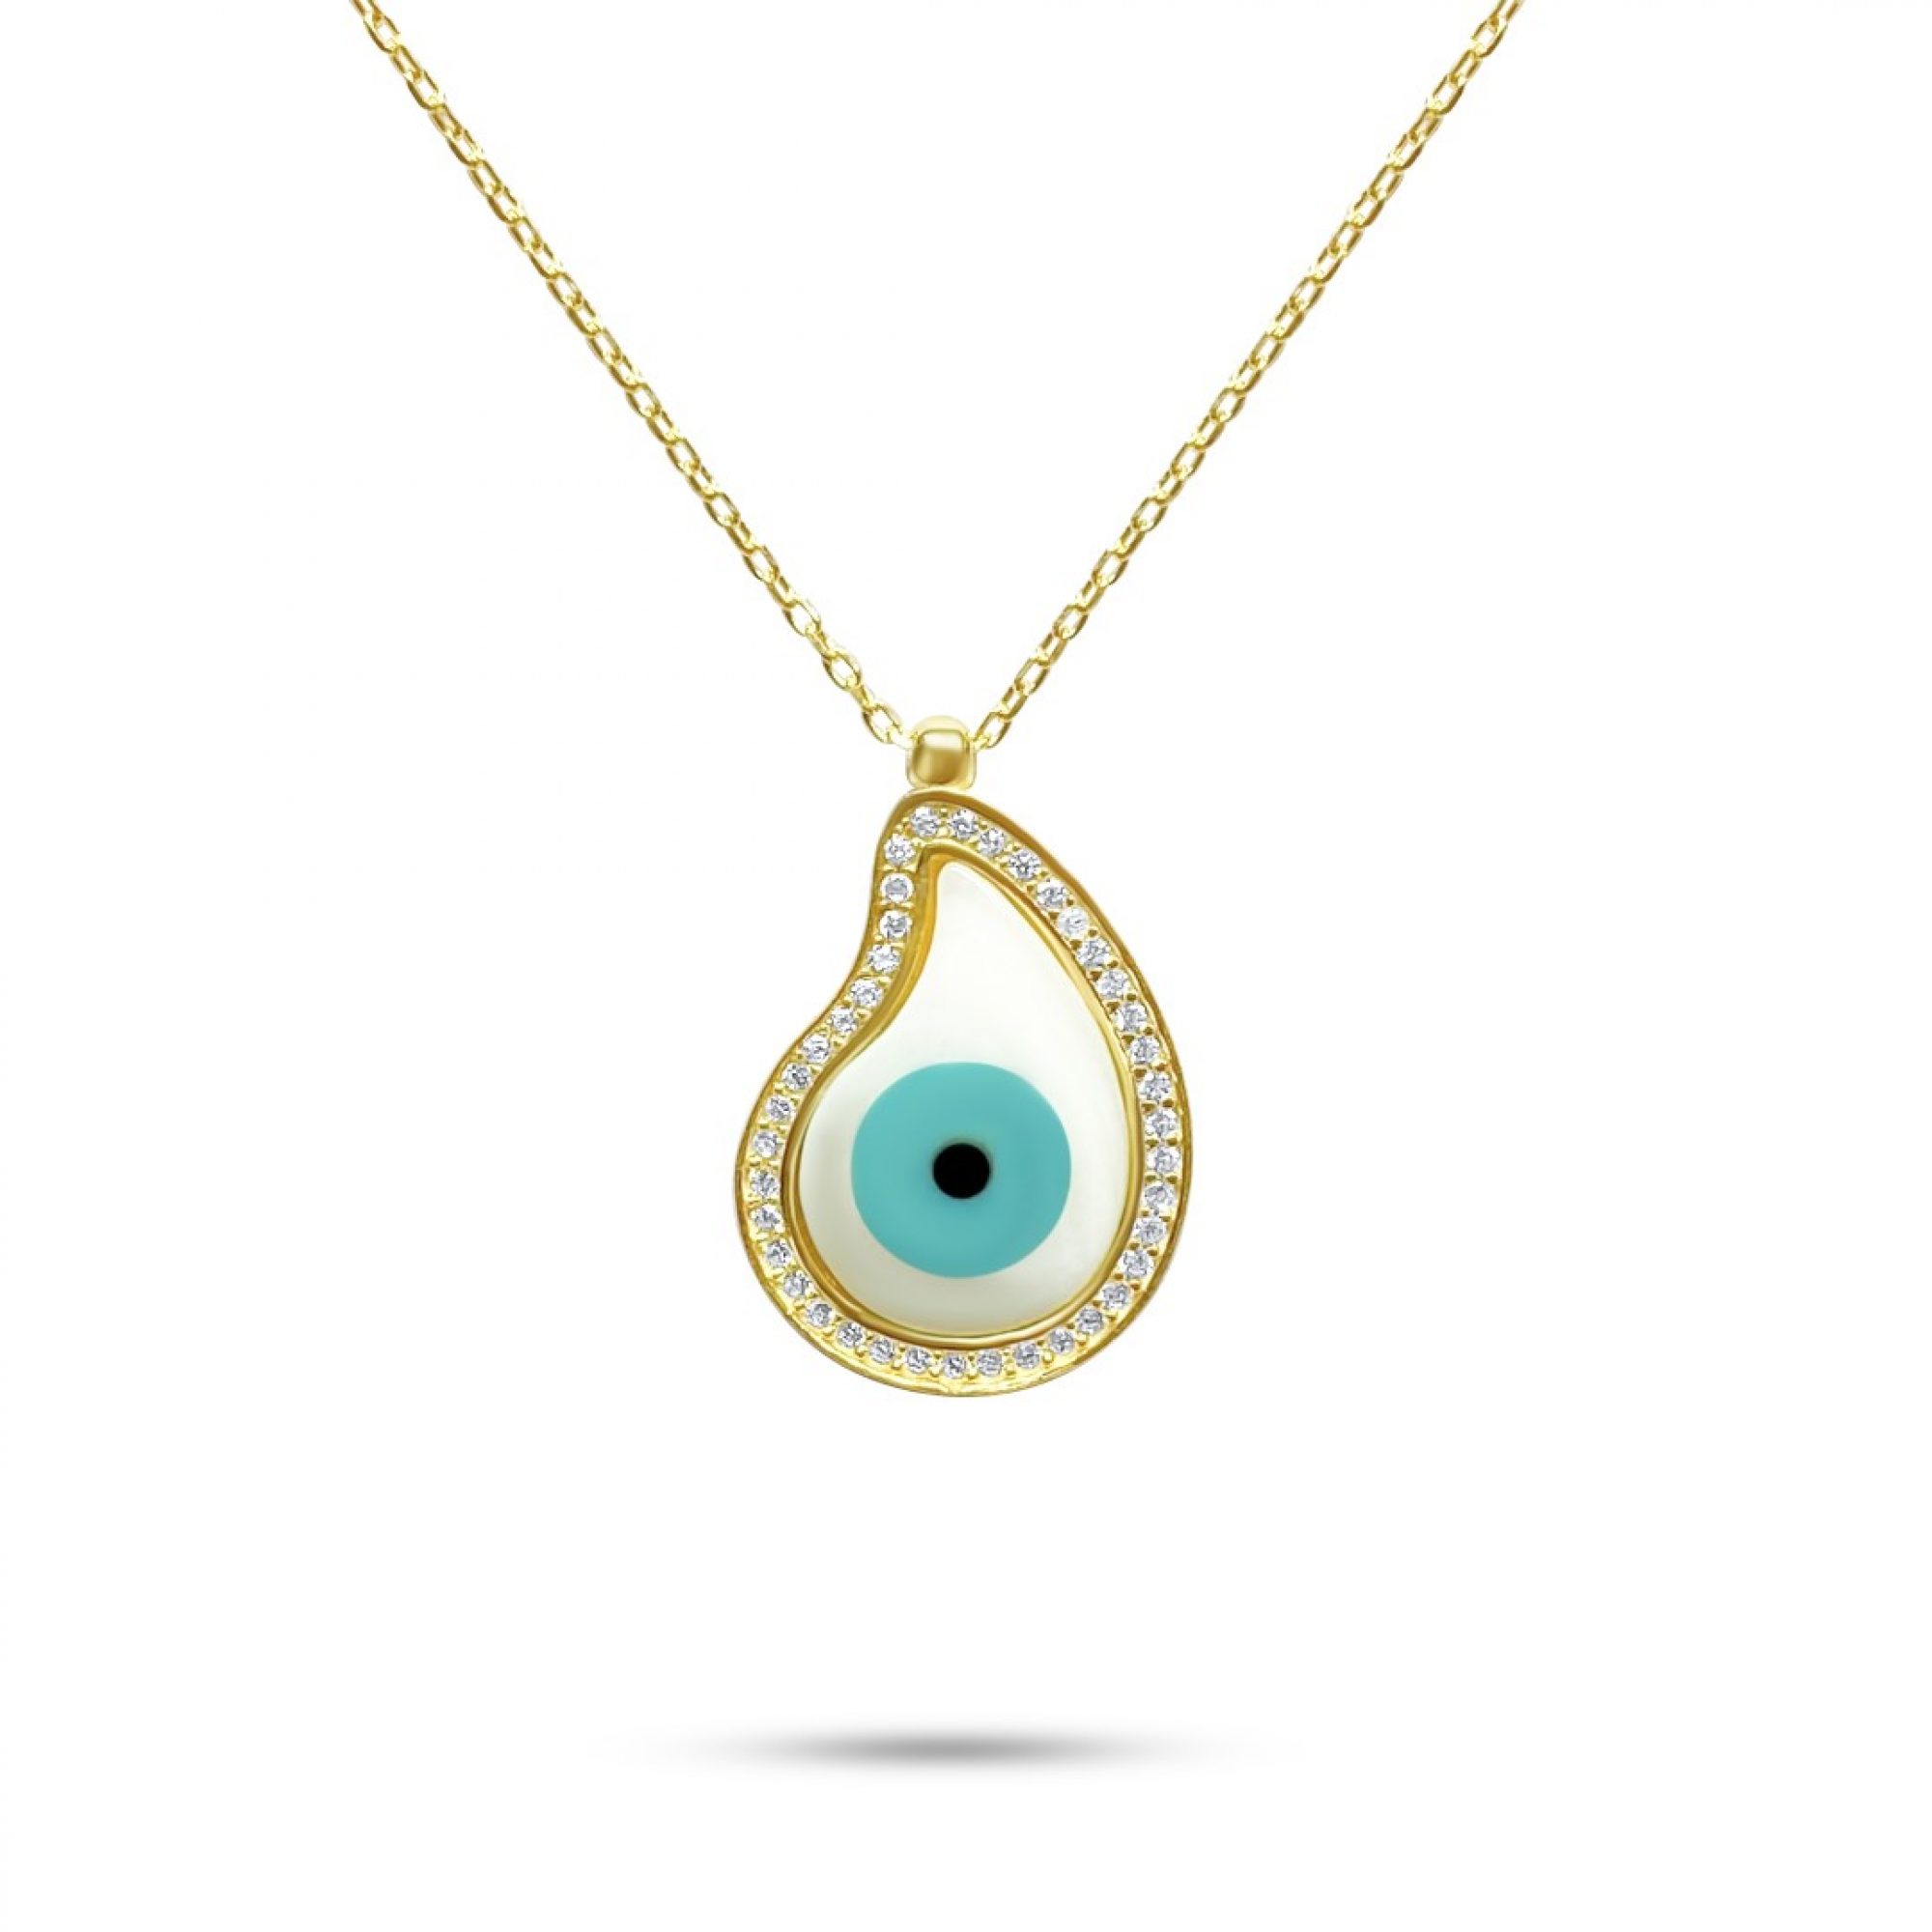 Gold plated eye necklace with mother of pearl and zircon stones